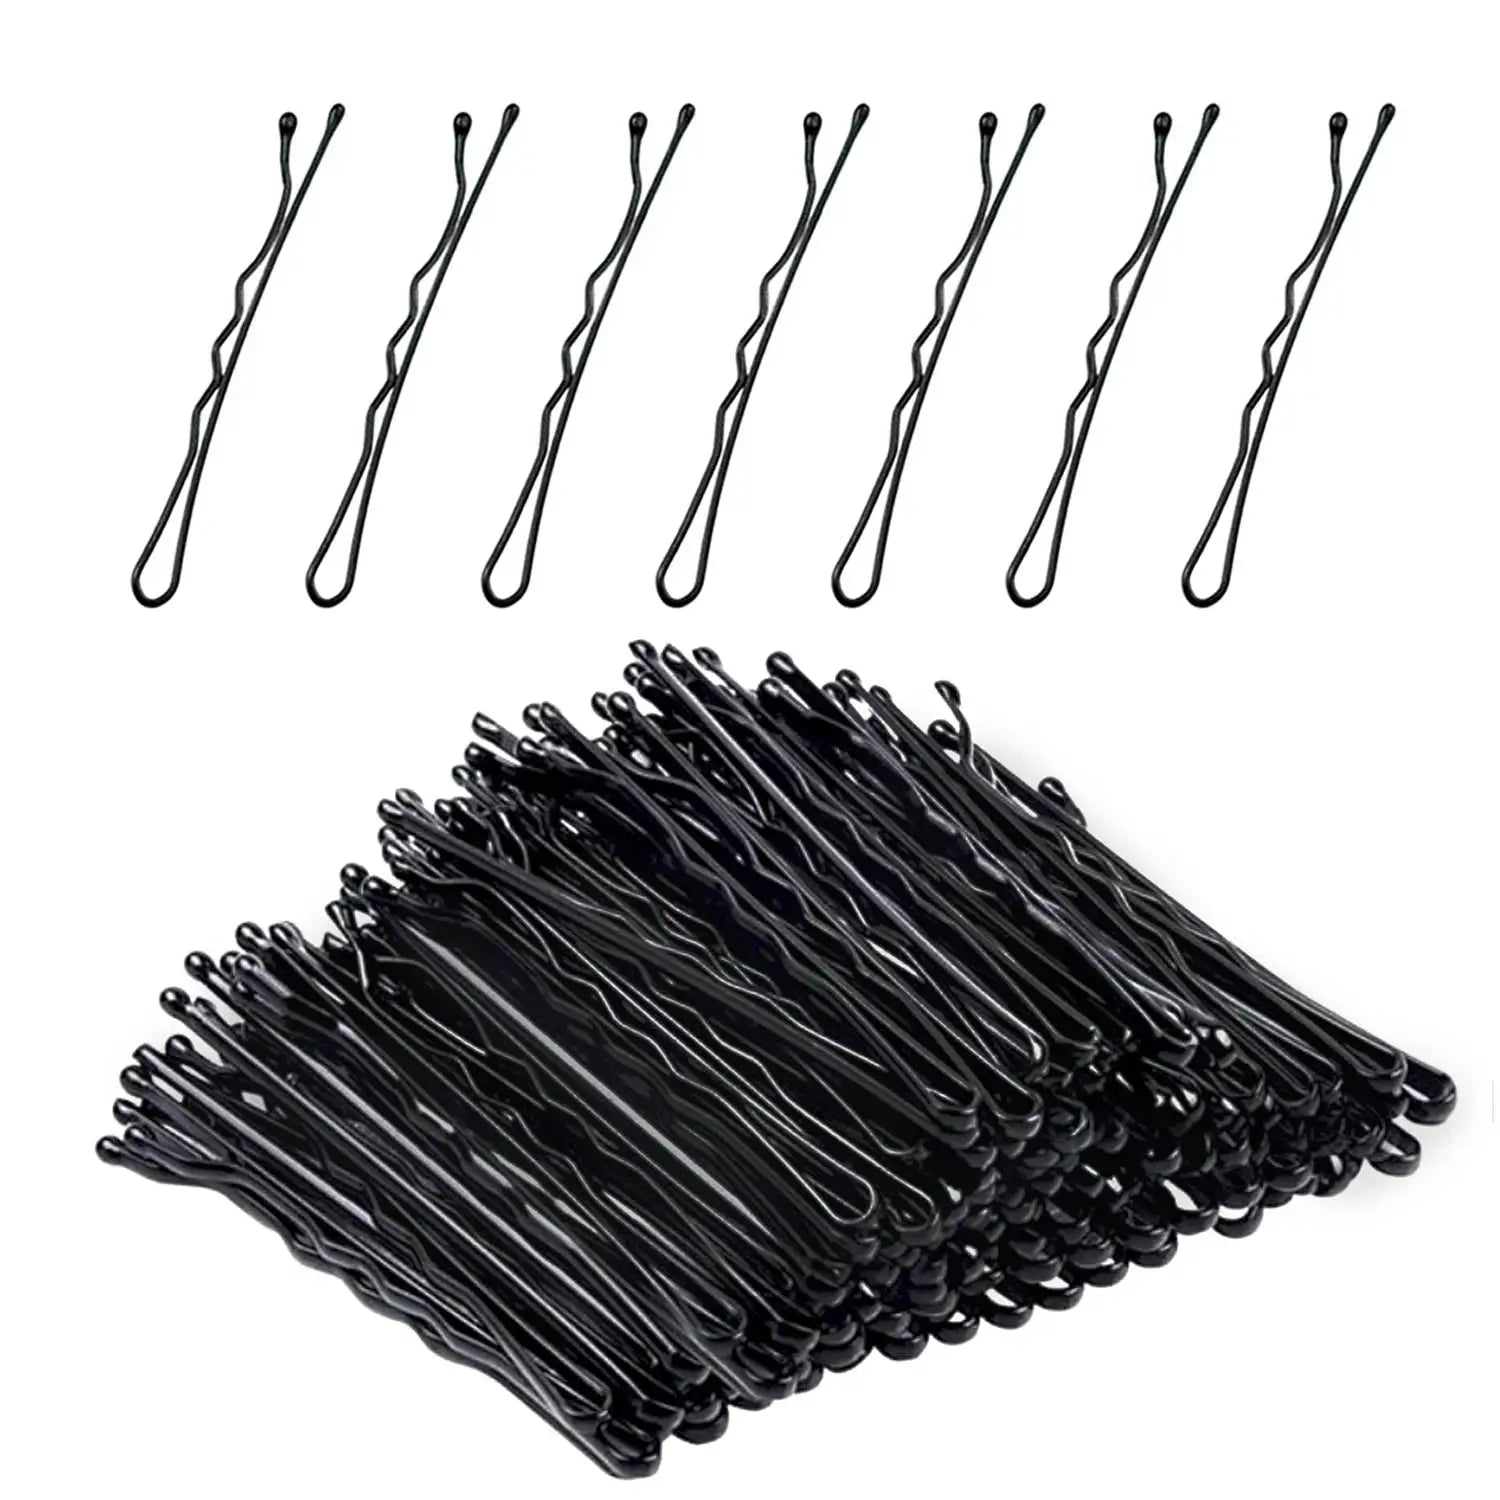 Black plastic cable ties for 120pc Wavy Kirby Metal Bobby Hair Pins Clips